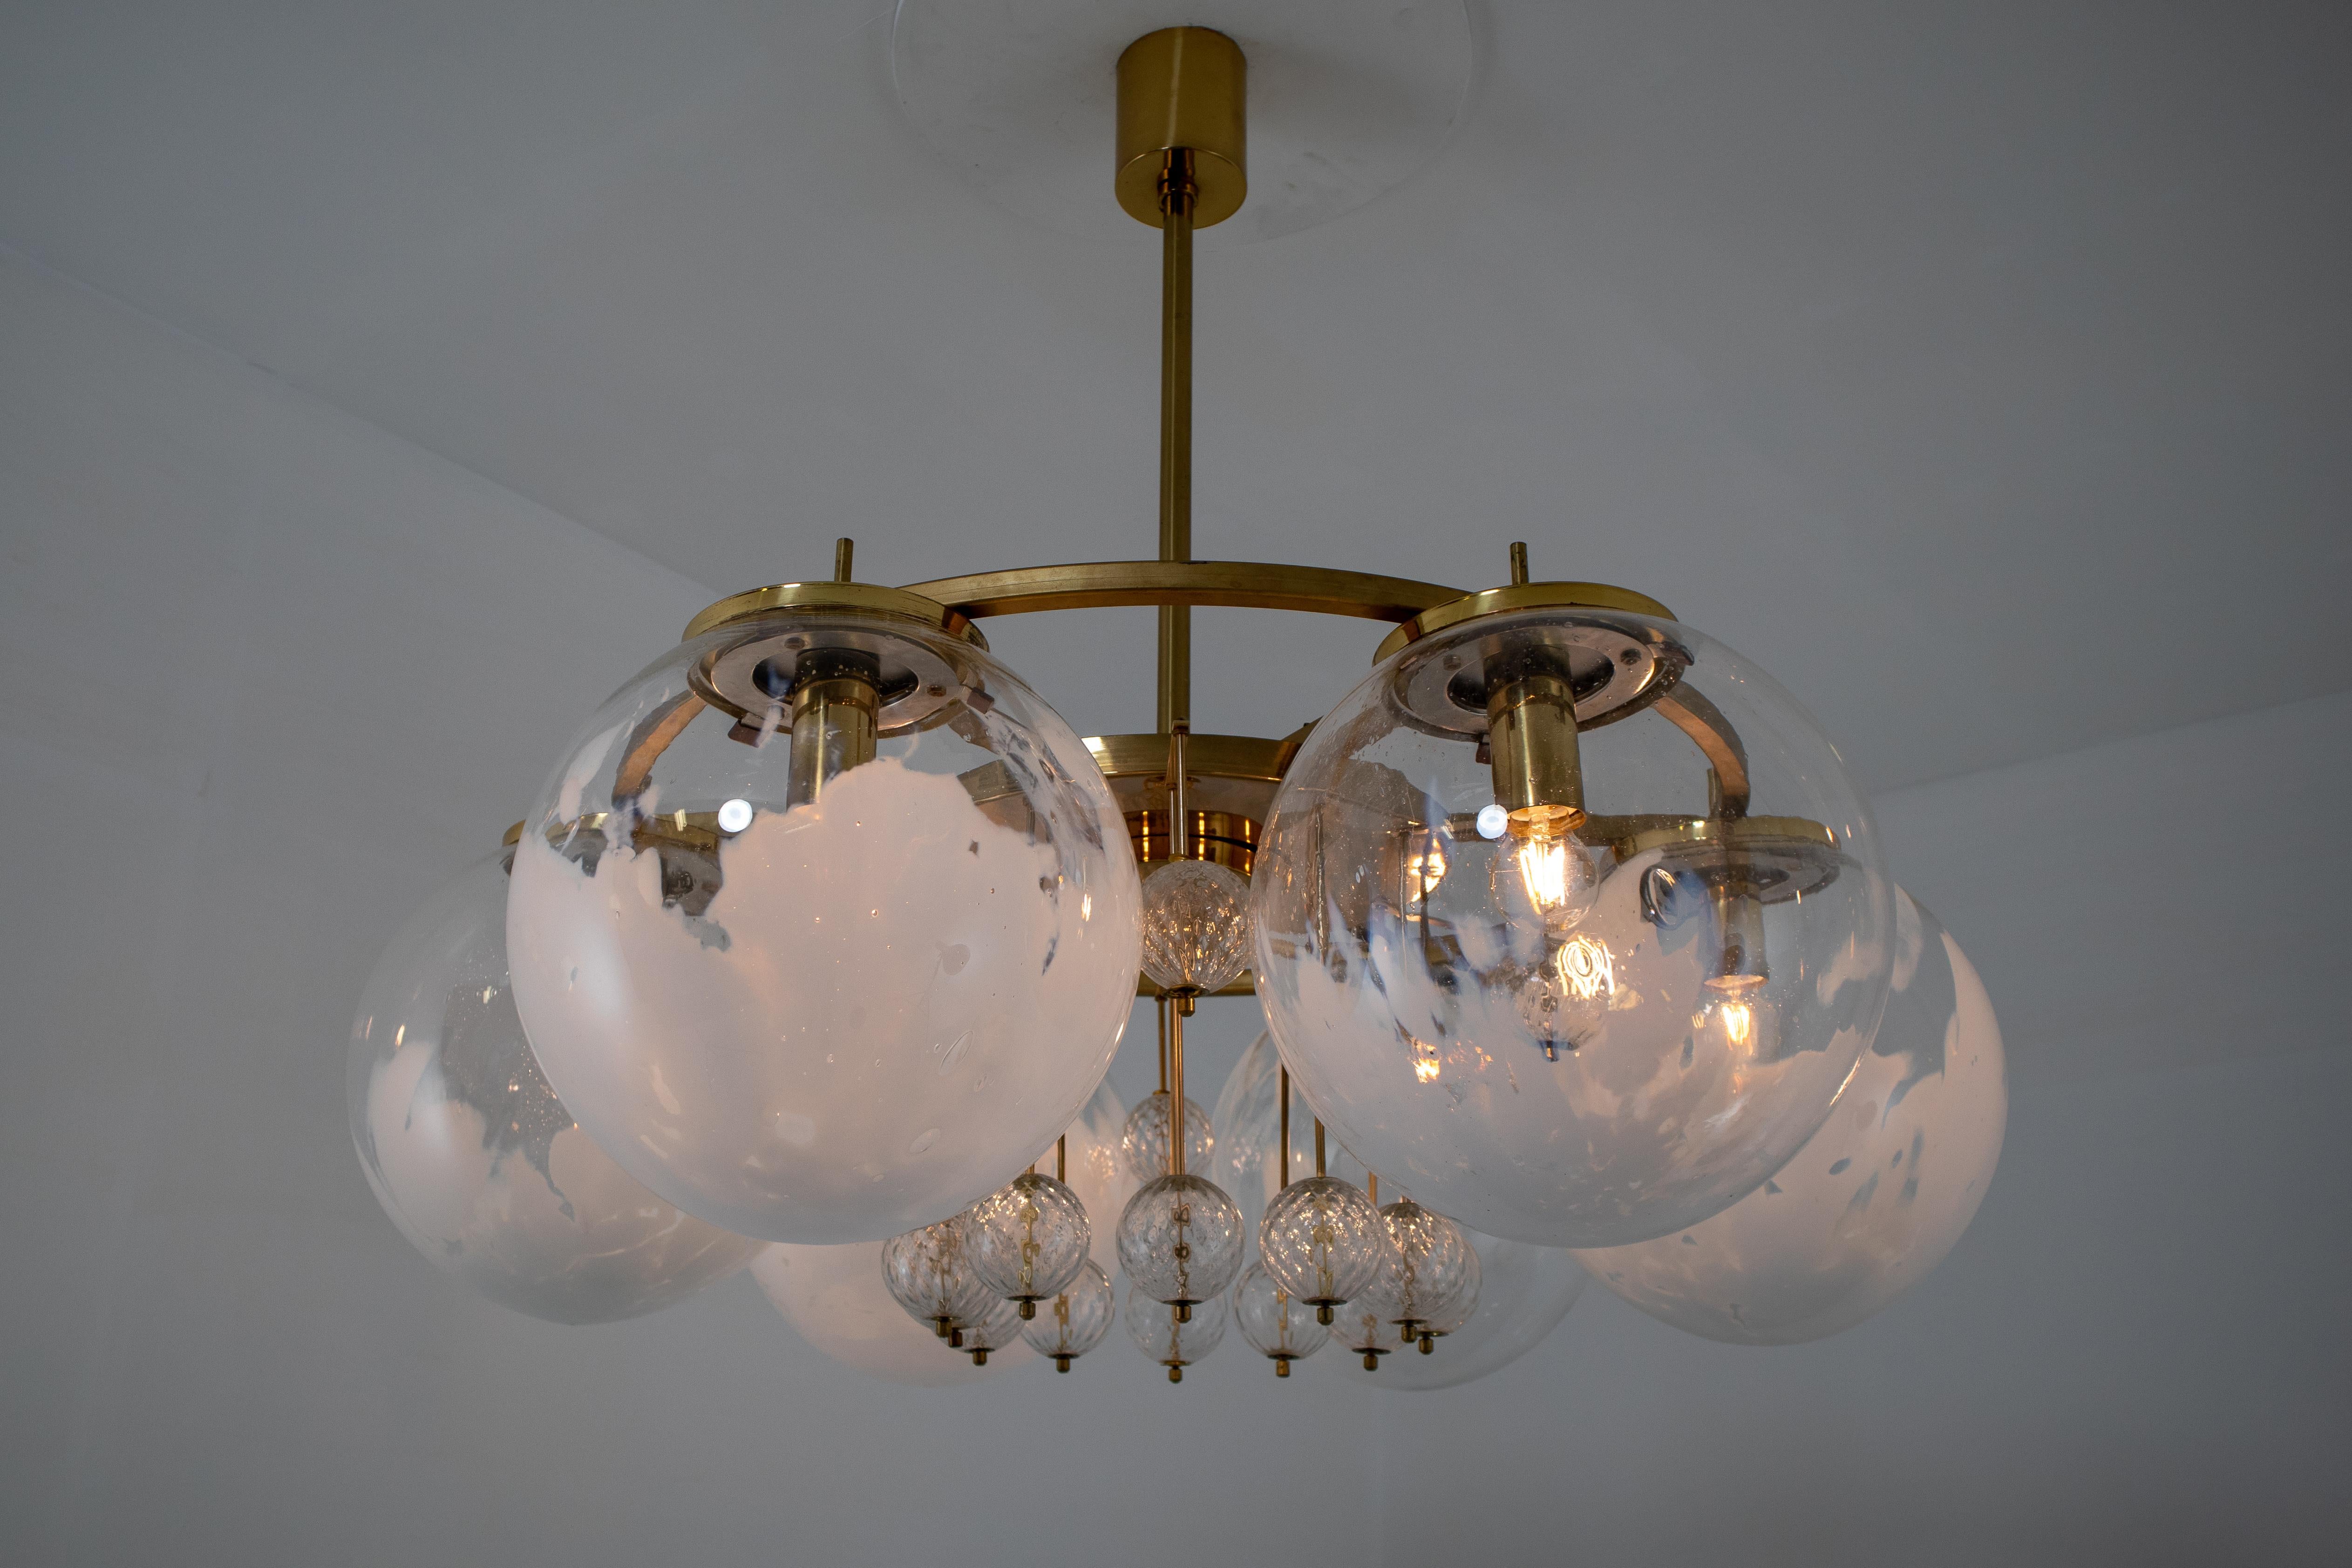 Large Midcentury Hotel Chandelier, in Brass and Decorated Art Glass 4